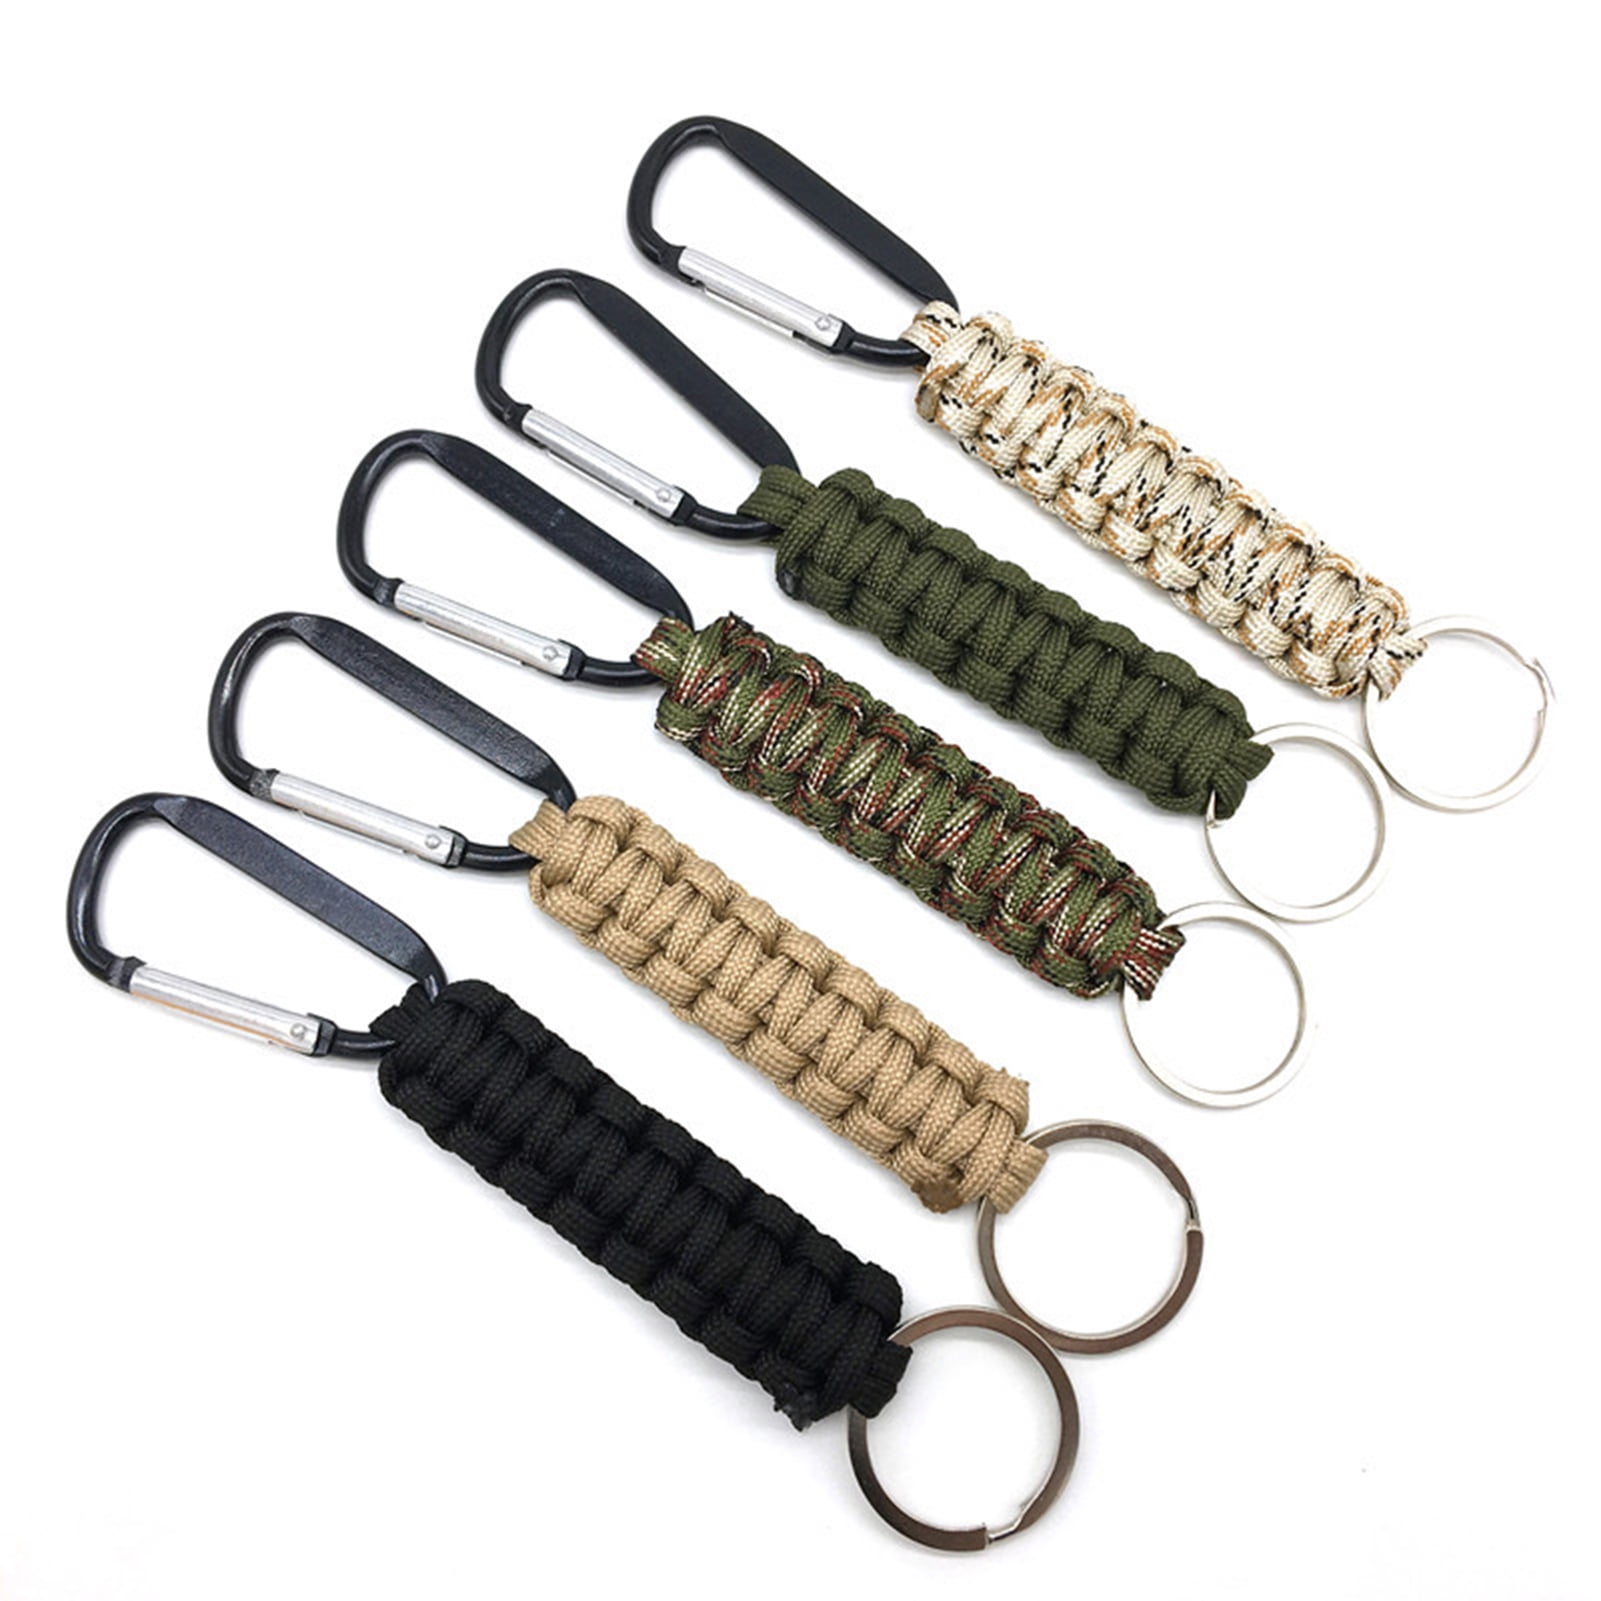 Woven Paracord Lanyard Cord Key Chain Outdoor Survival Carabiner Hook New 